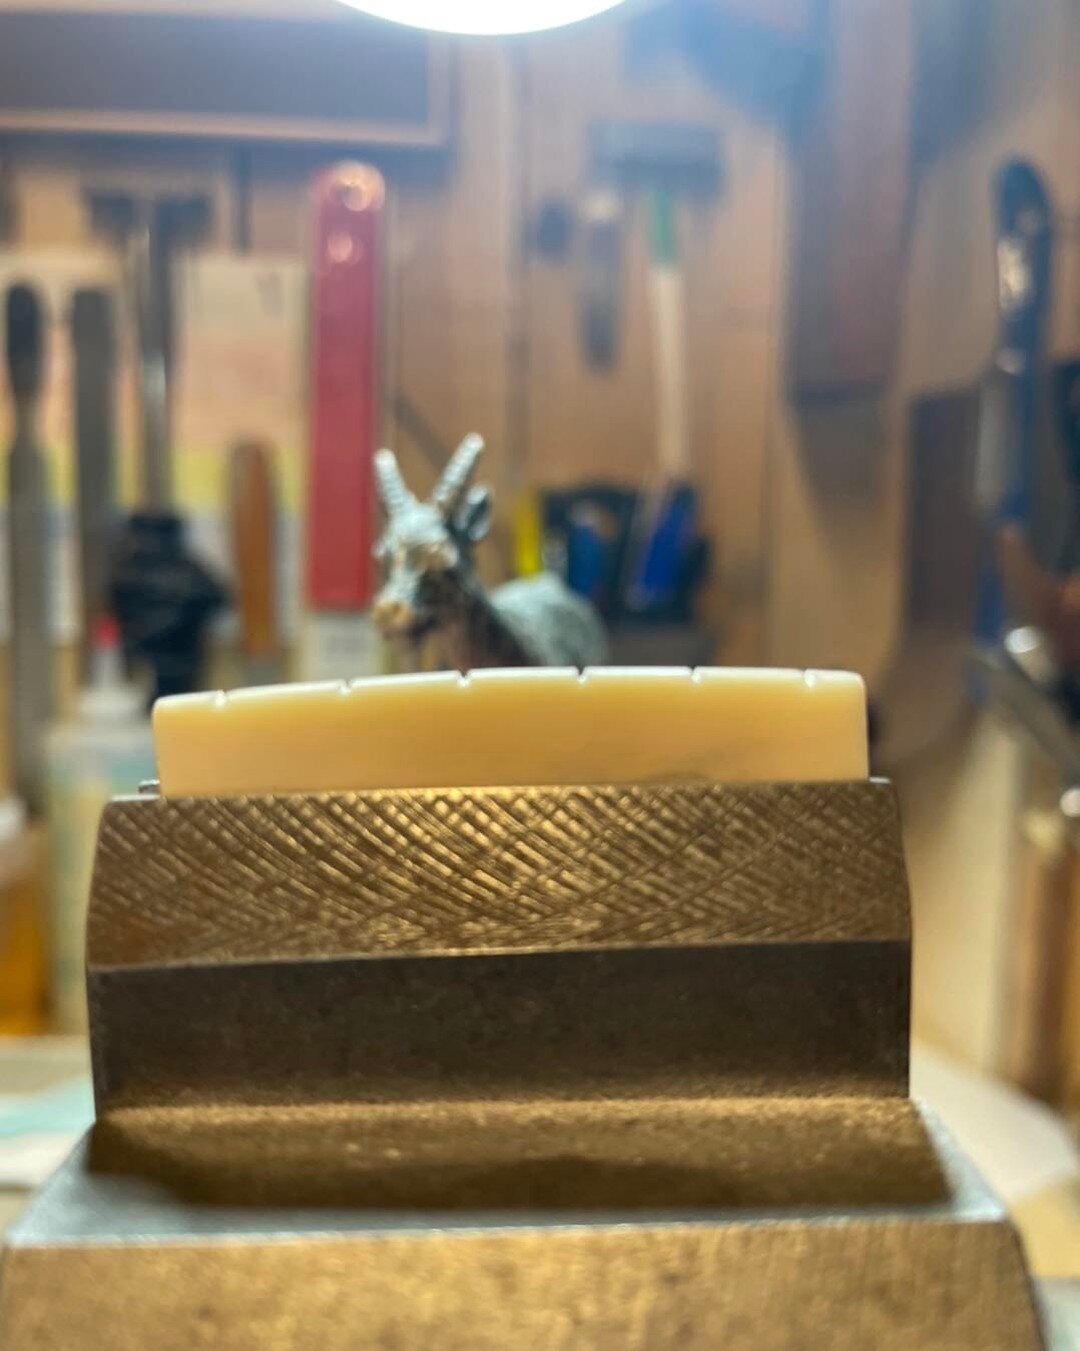 Prelim bone nut shaping with my work goat
Thanks StewMac for making it easier with the fancy spacing rule!)

#stewmac #luthiertools #looth #loothing #luthier #guitarmaker #guitarmaking #madeincanada #southglengarry #acoustic #goat #kids #fun #peace #